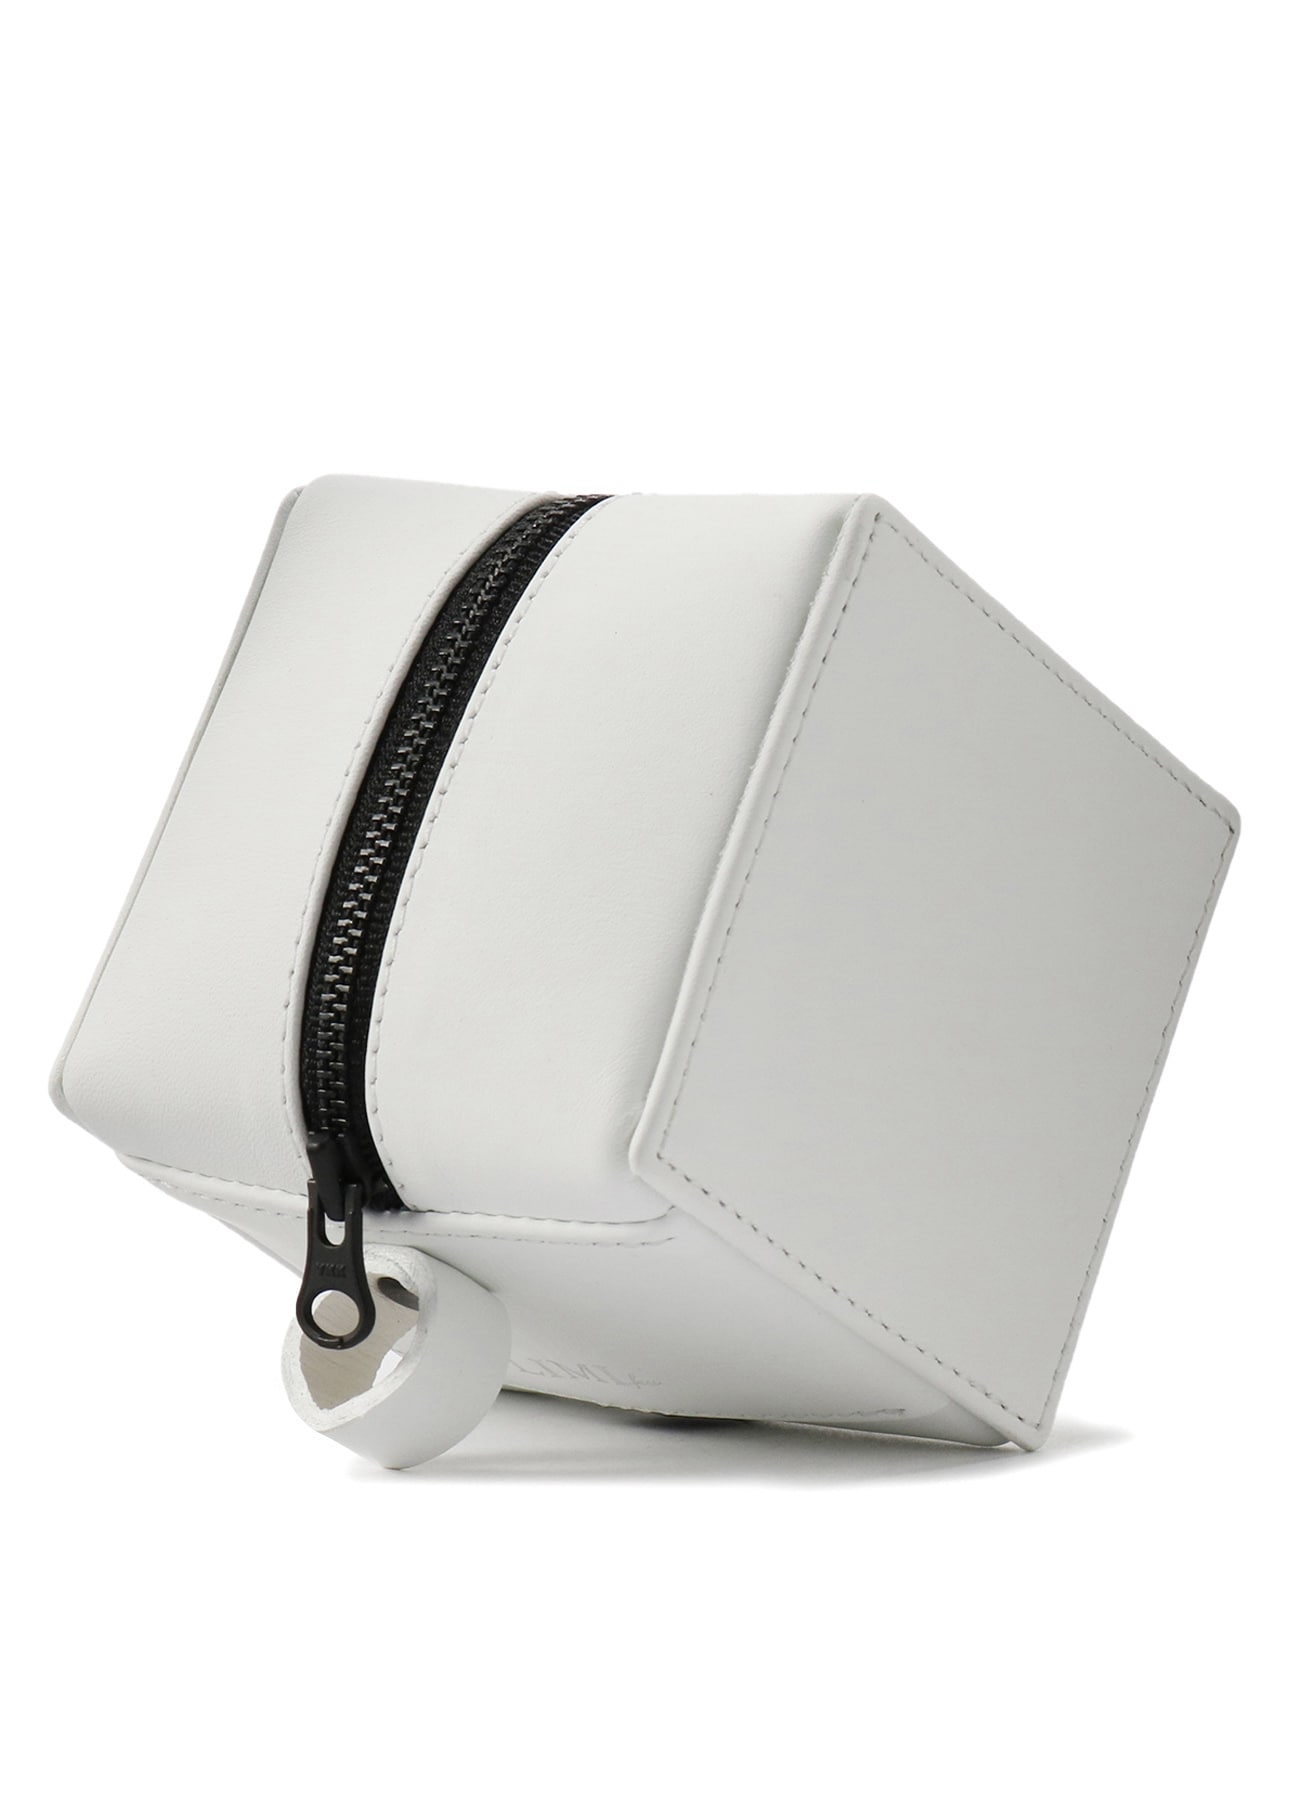 Rubber Touch Leather B Mini Cube Bag(FREE SIZE White): Vintage 1.1 